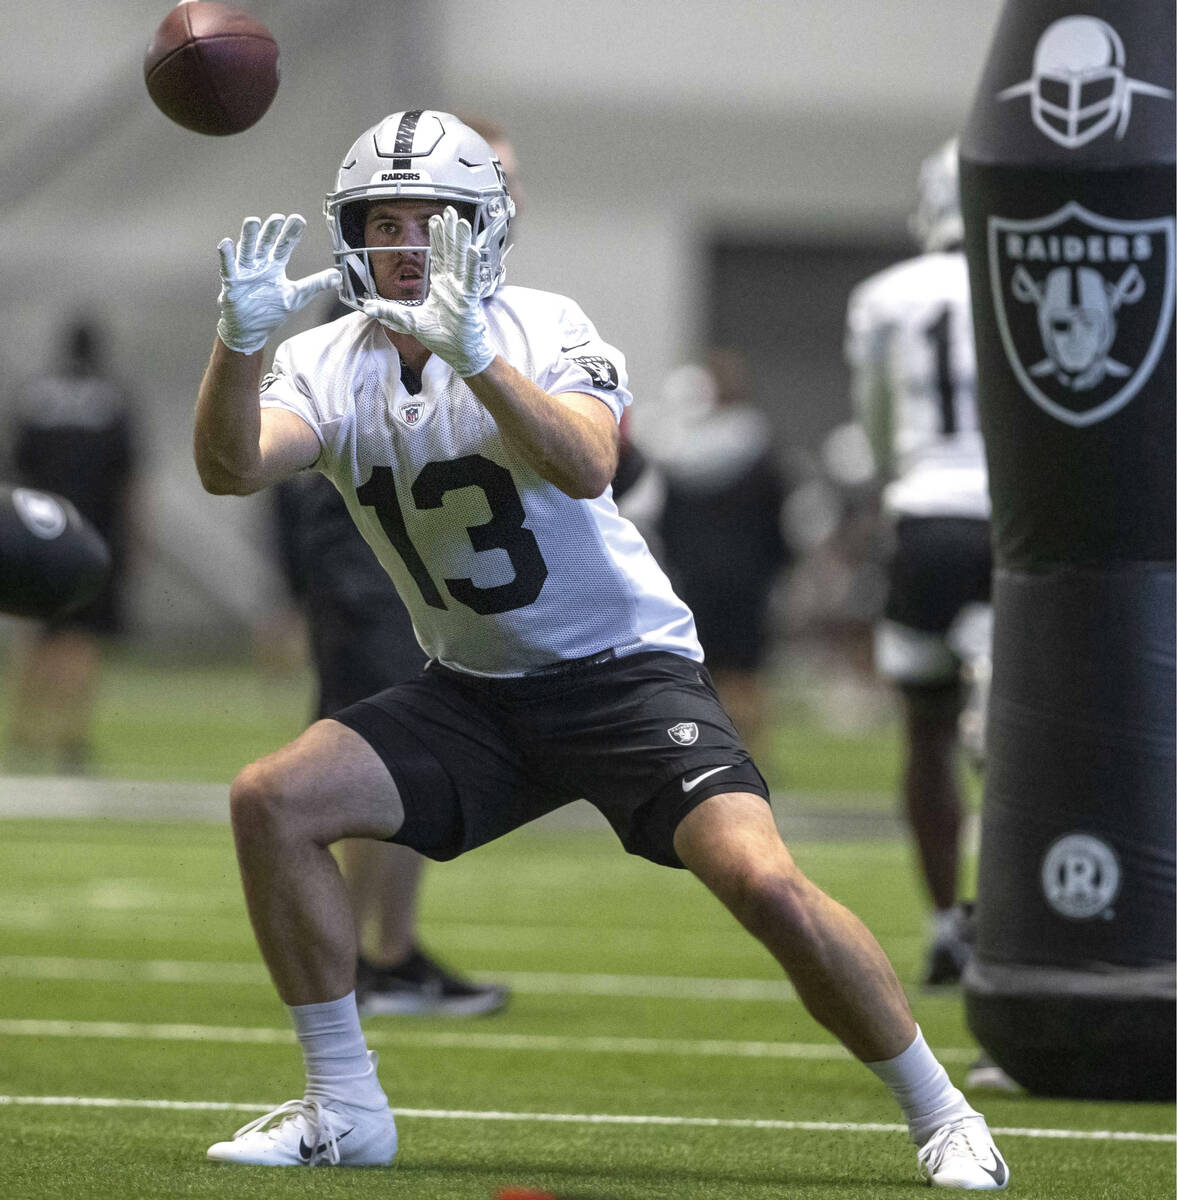 Raiders wide receiver Hunter Renfrow (13) makes a catch during the team’s training camp ...